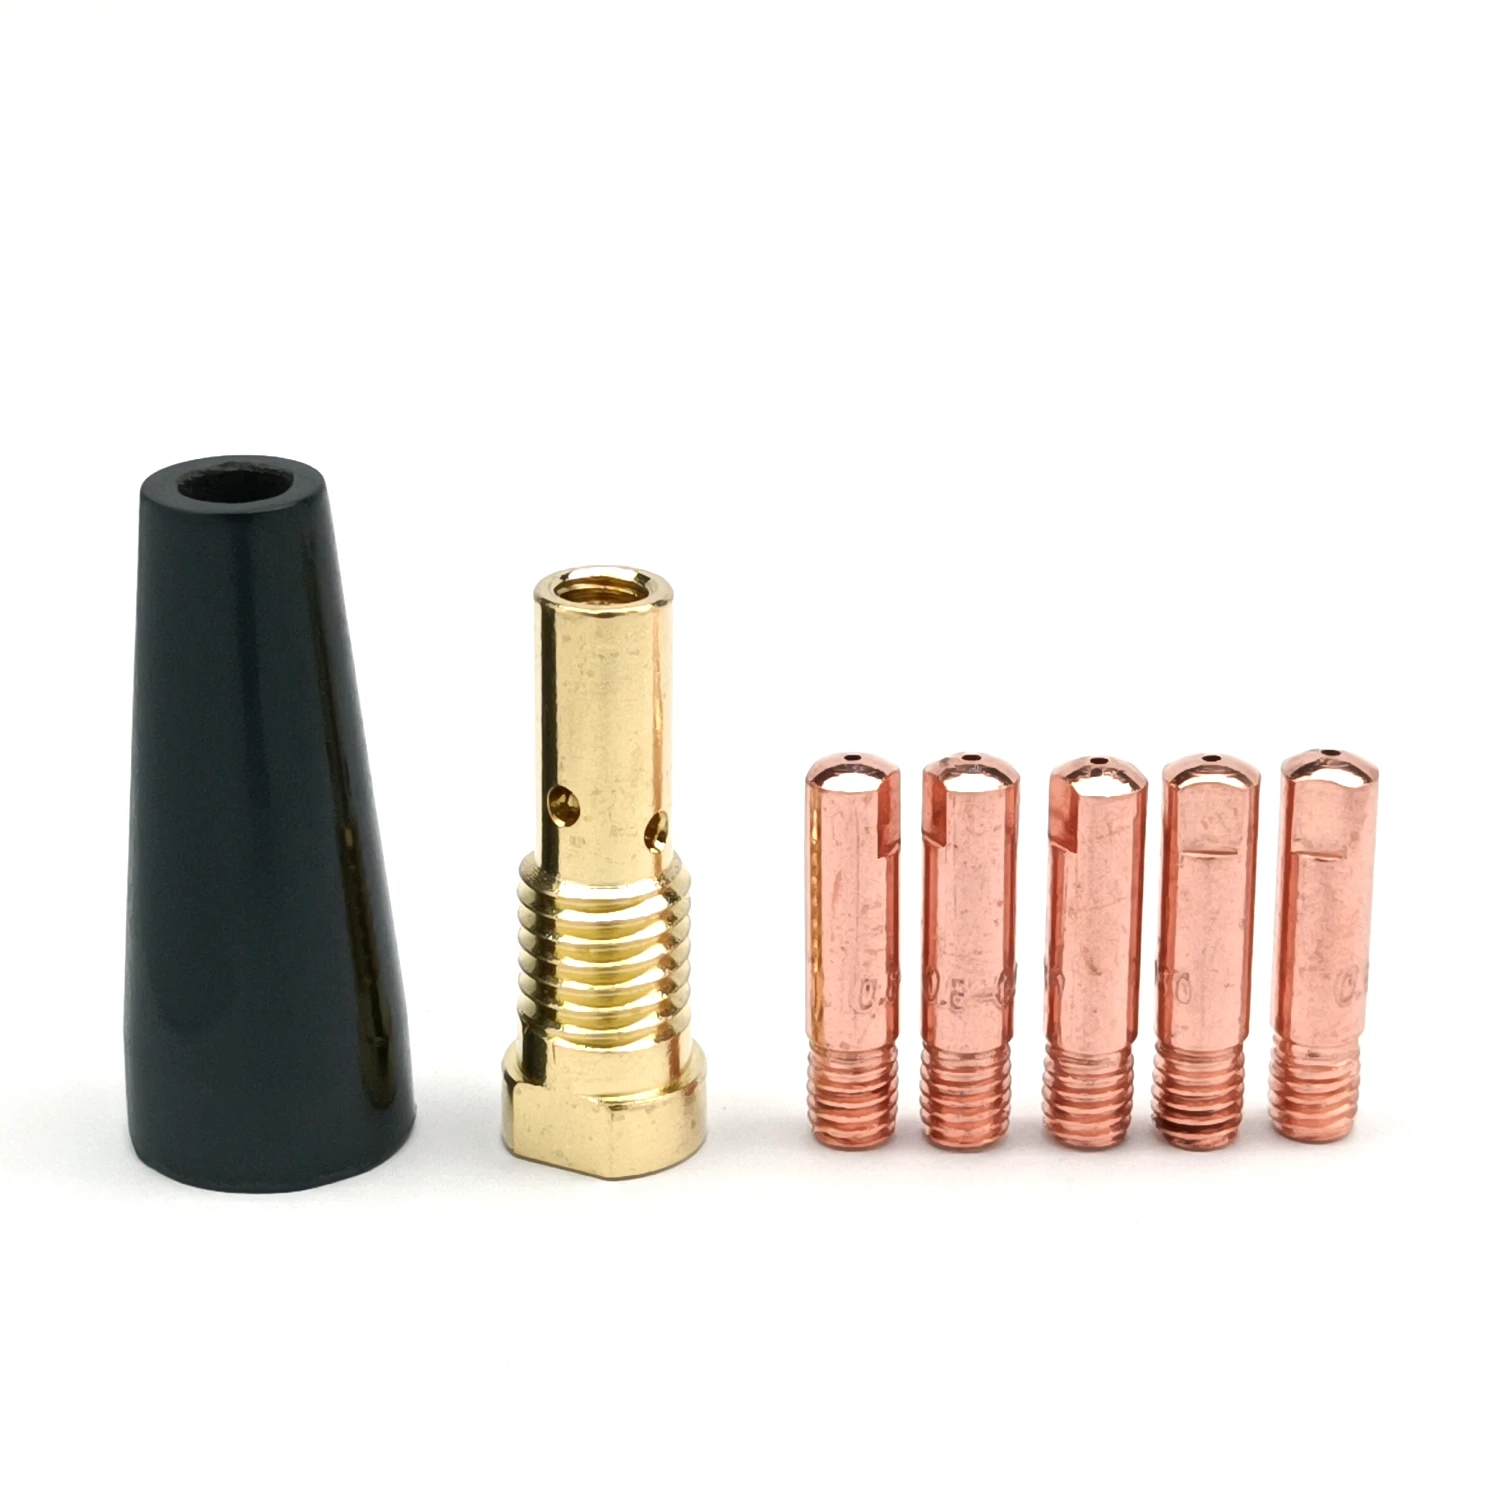 0.6/0.8/0.9/1.0 MIG MAG Gasless Flux Cored Welding Torch Gun Contact Tip Nozzle Shield Holder Gas Diffuser